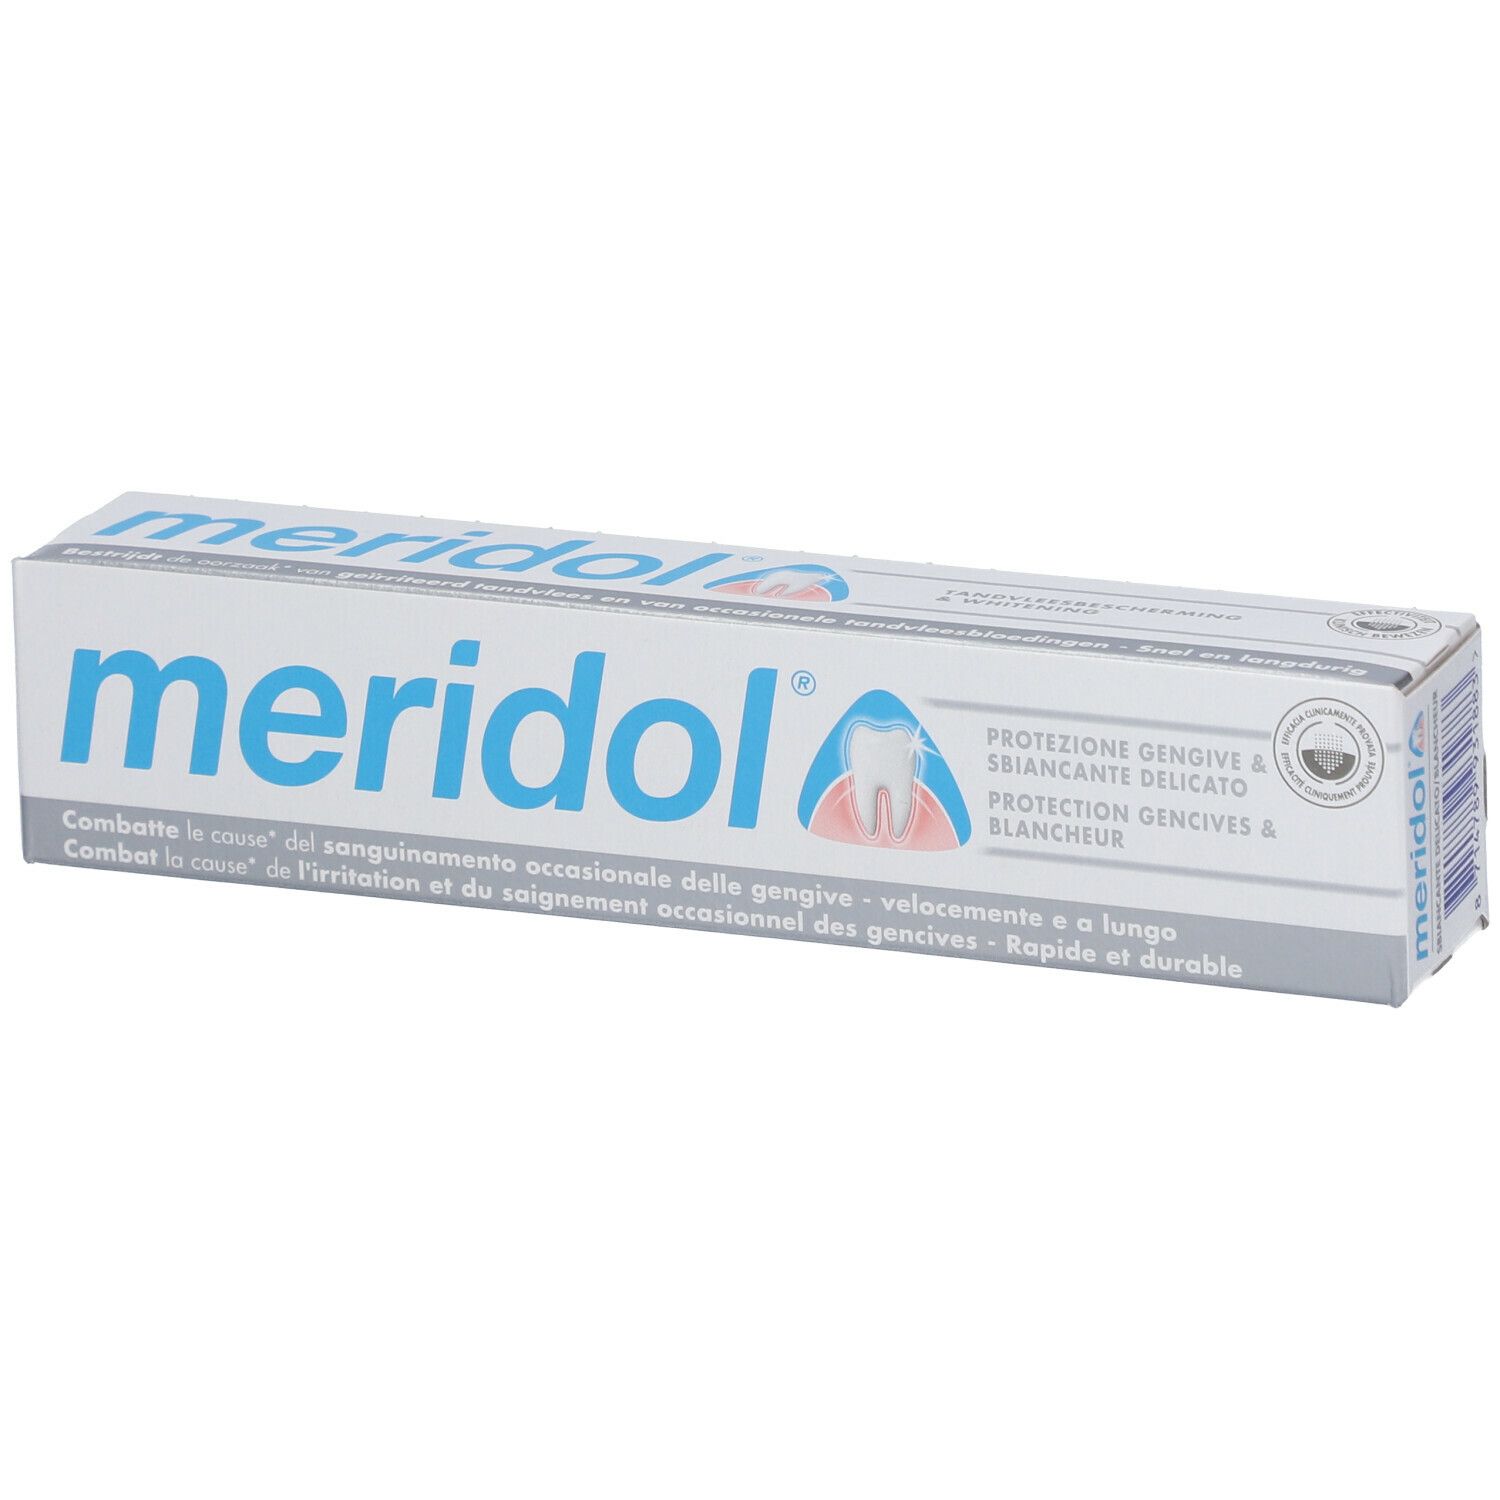 méridol® dentifrice protection gencives blancheur